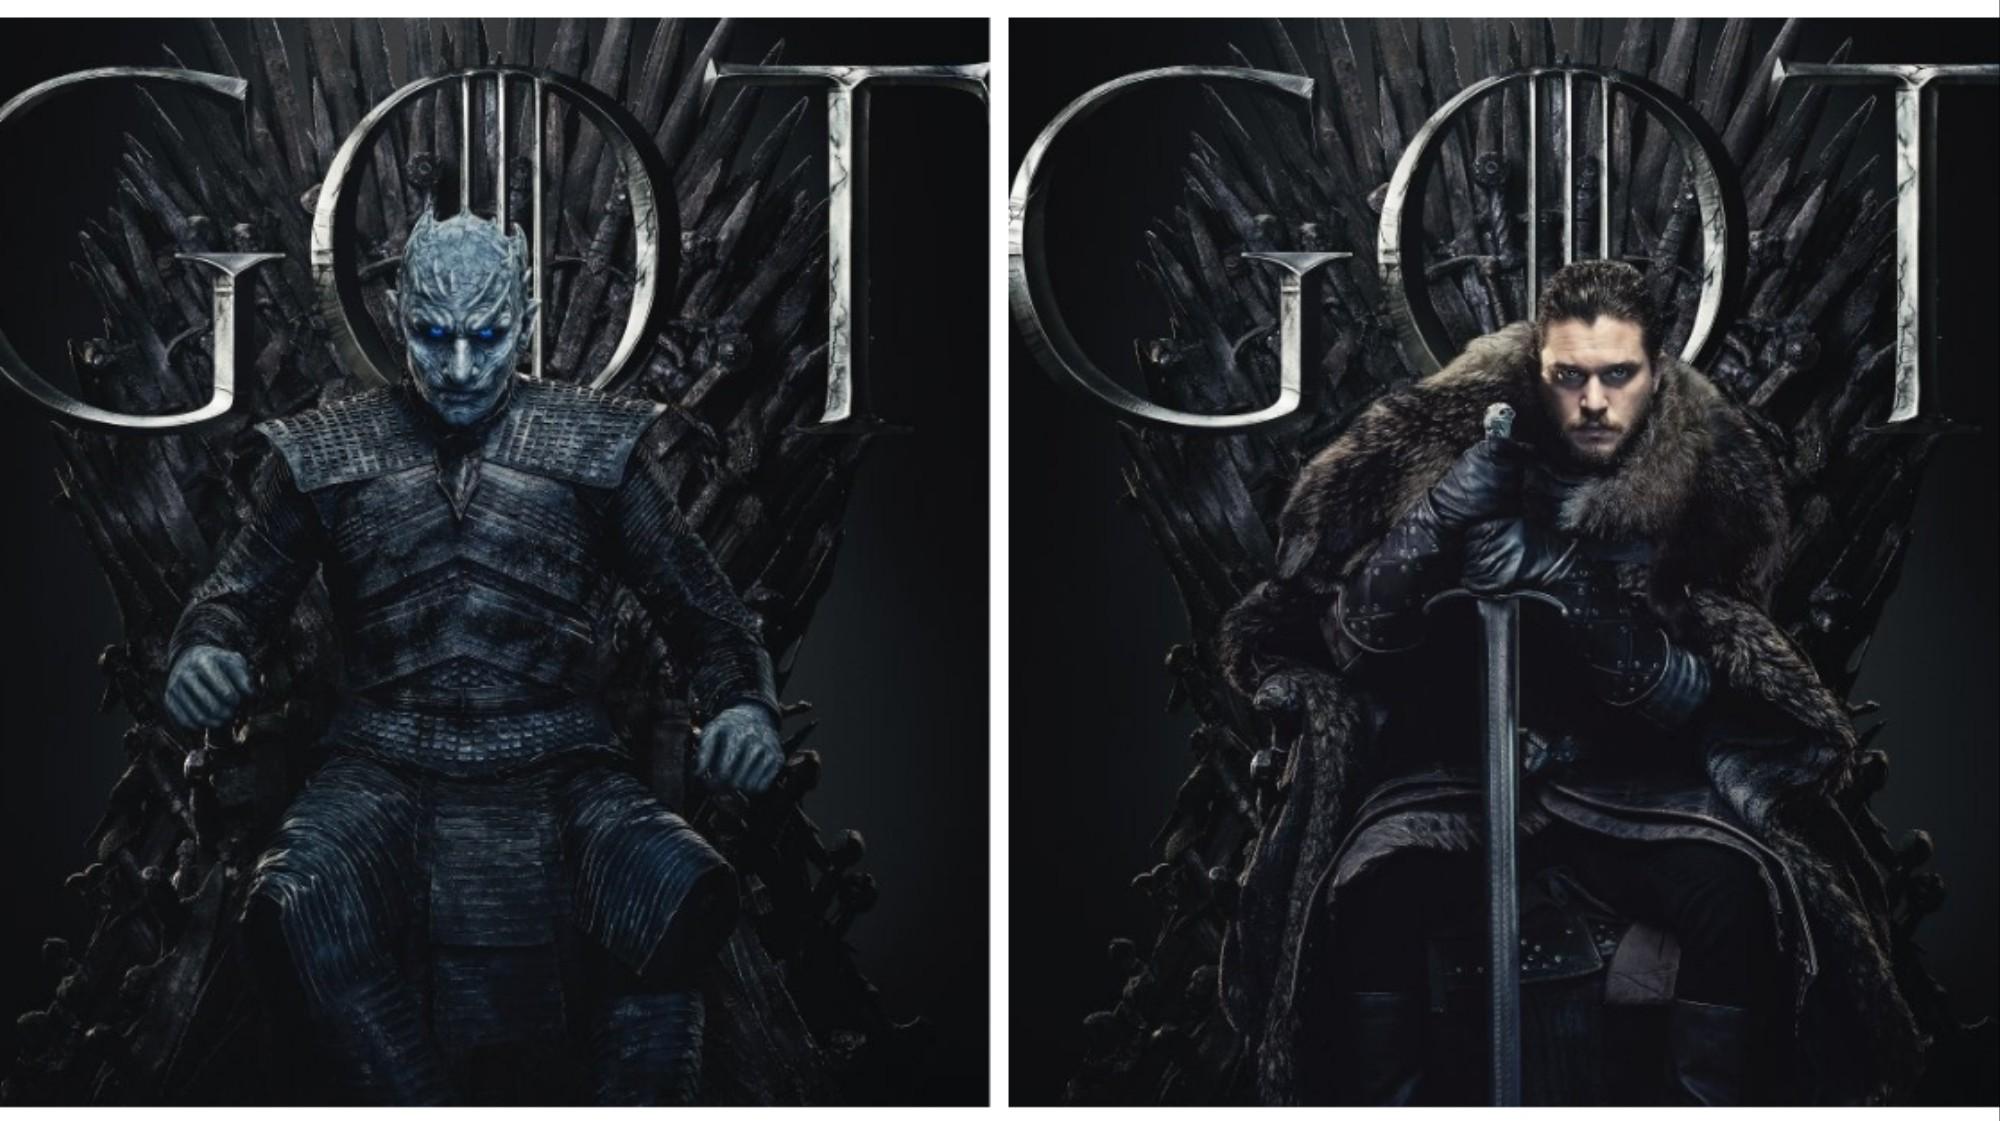 We Ranked How Badly the 'Game of Thrones' Characters Sit